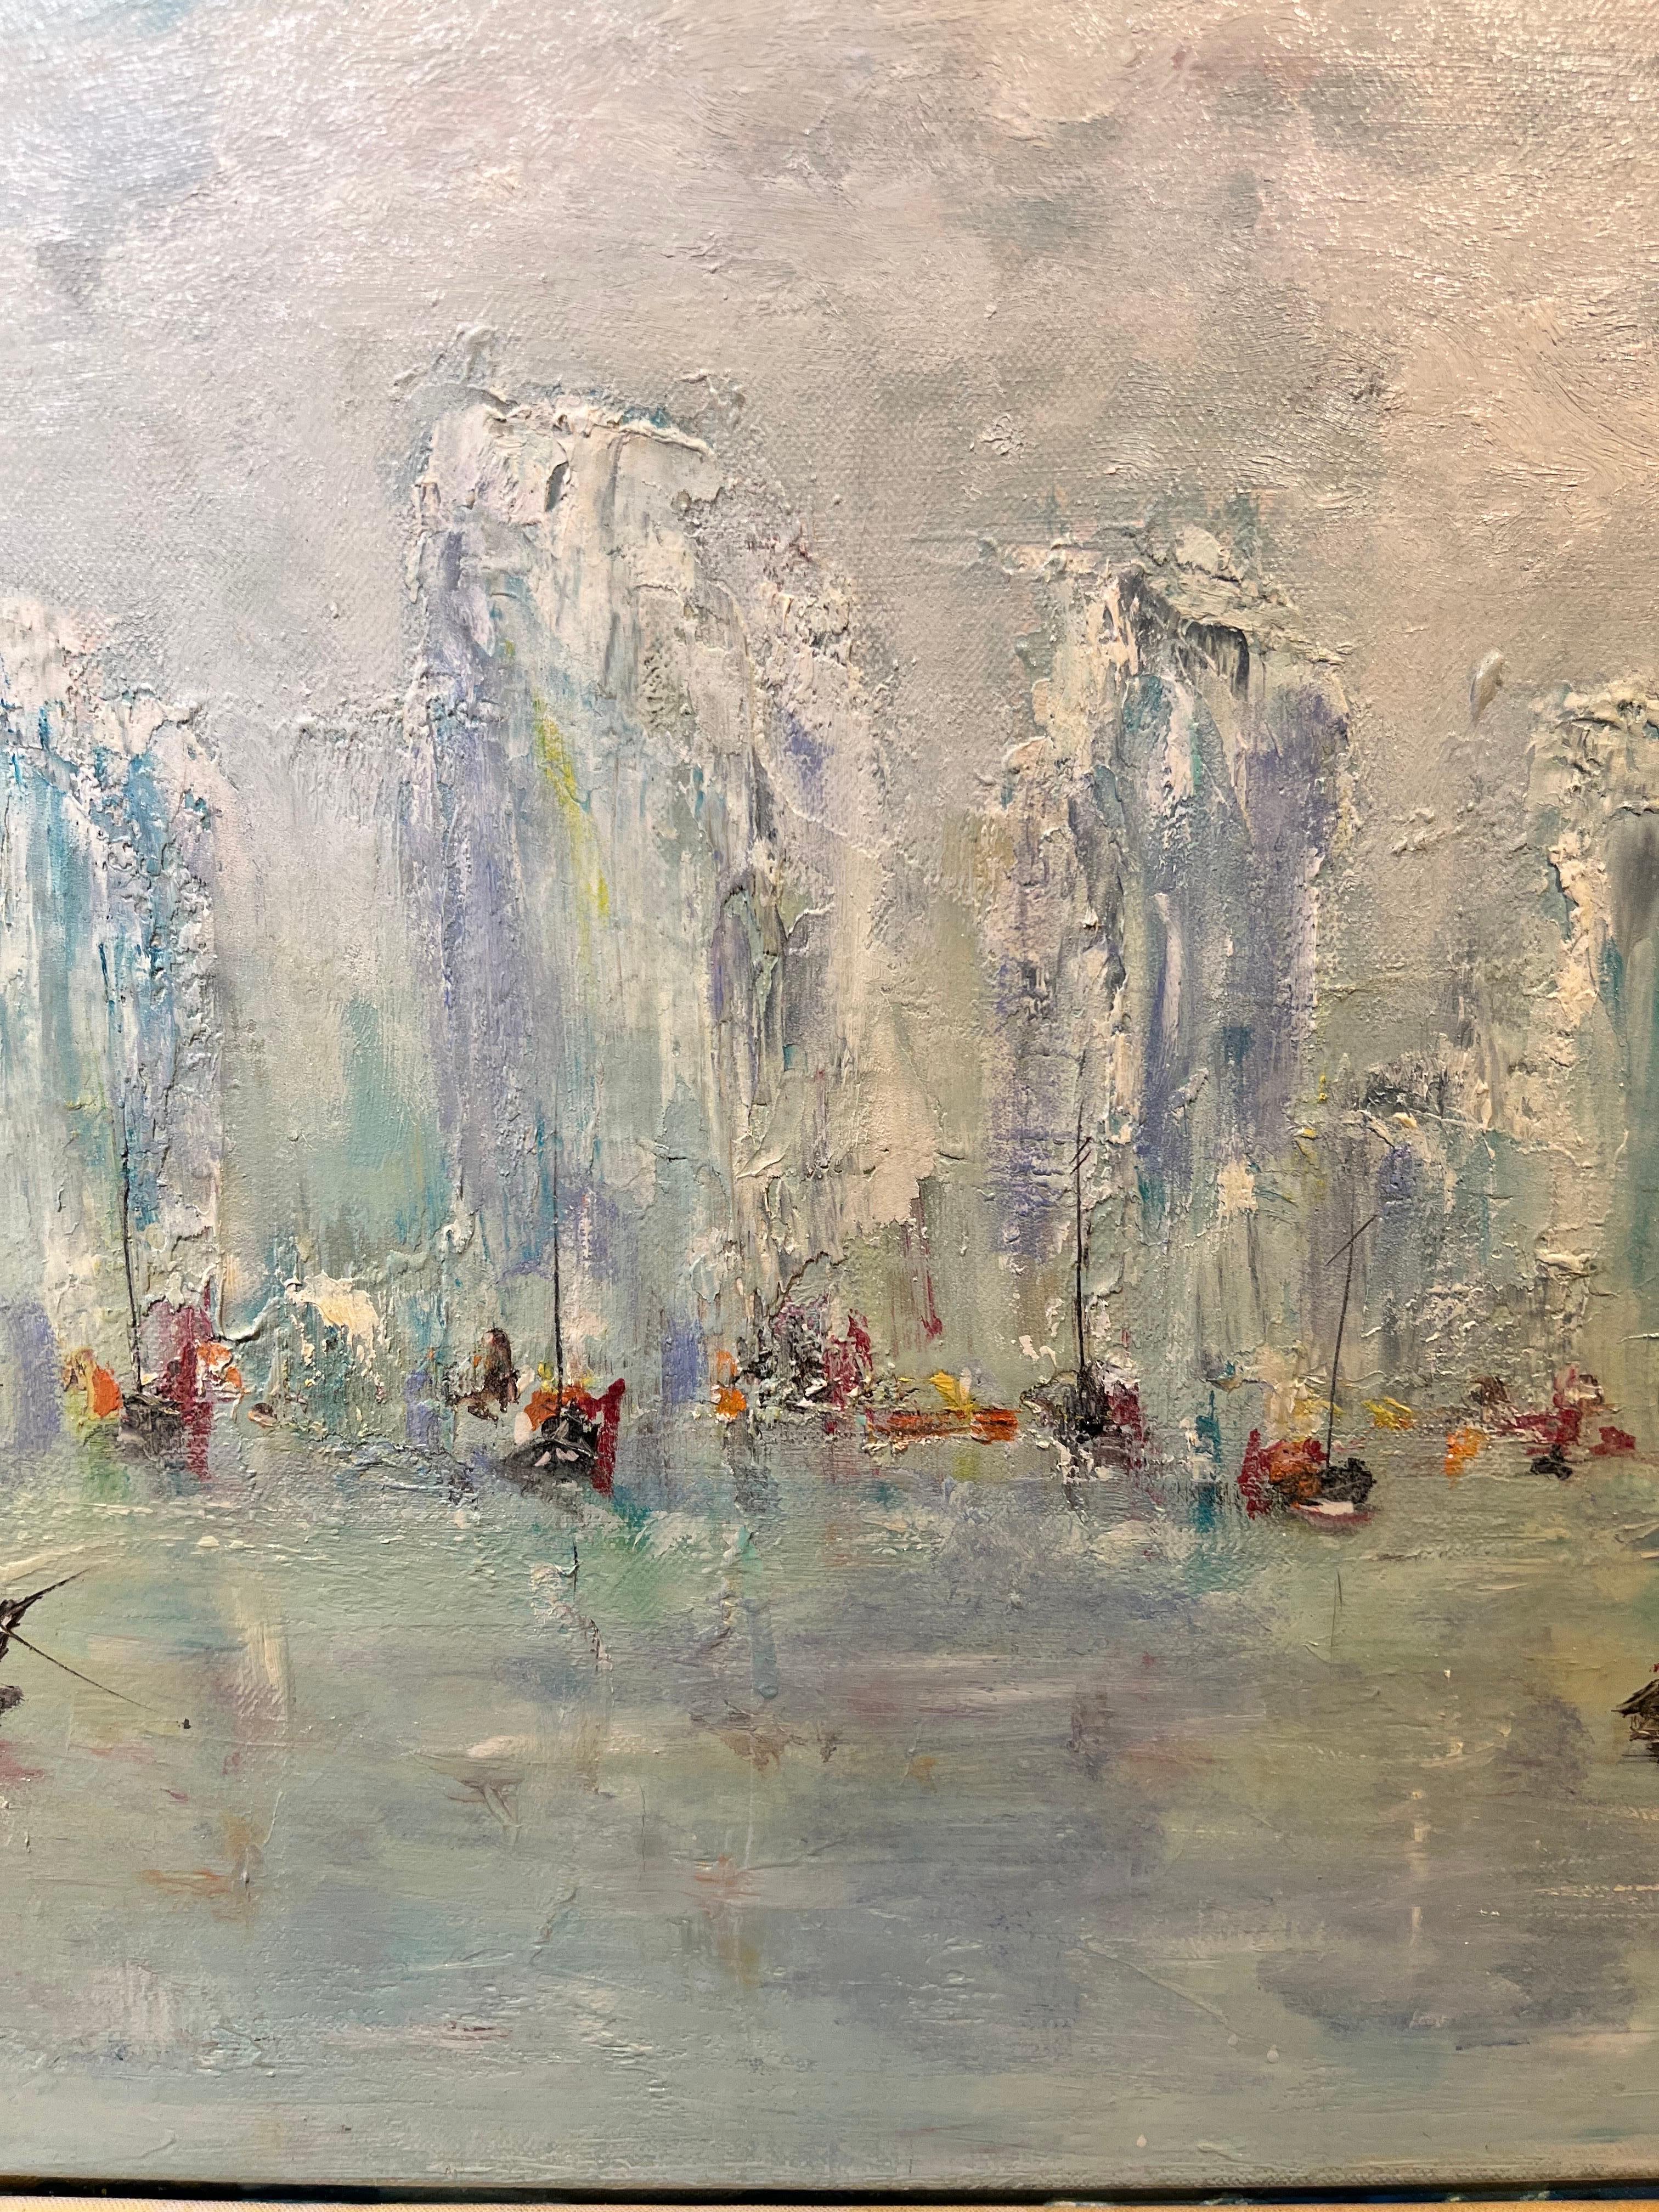 Fishermanes - Contemporary Painting by Patrice Brunet